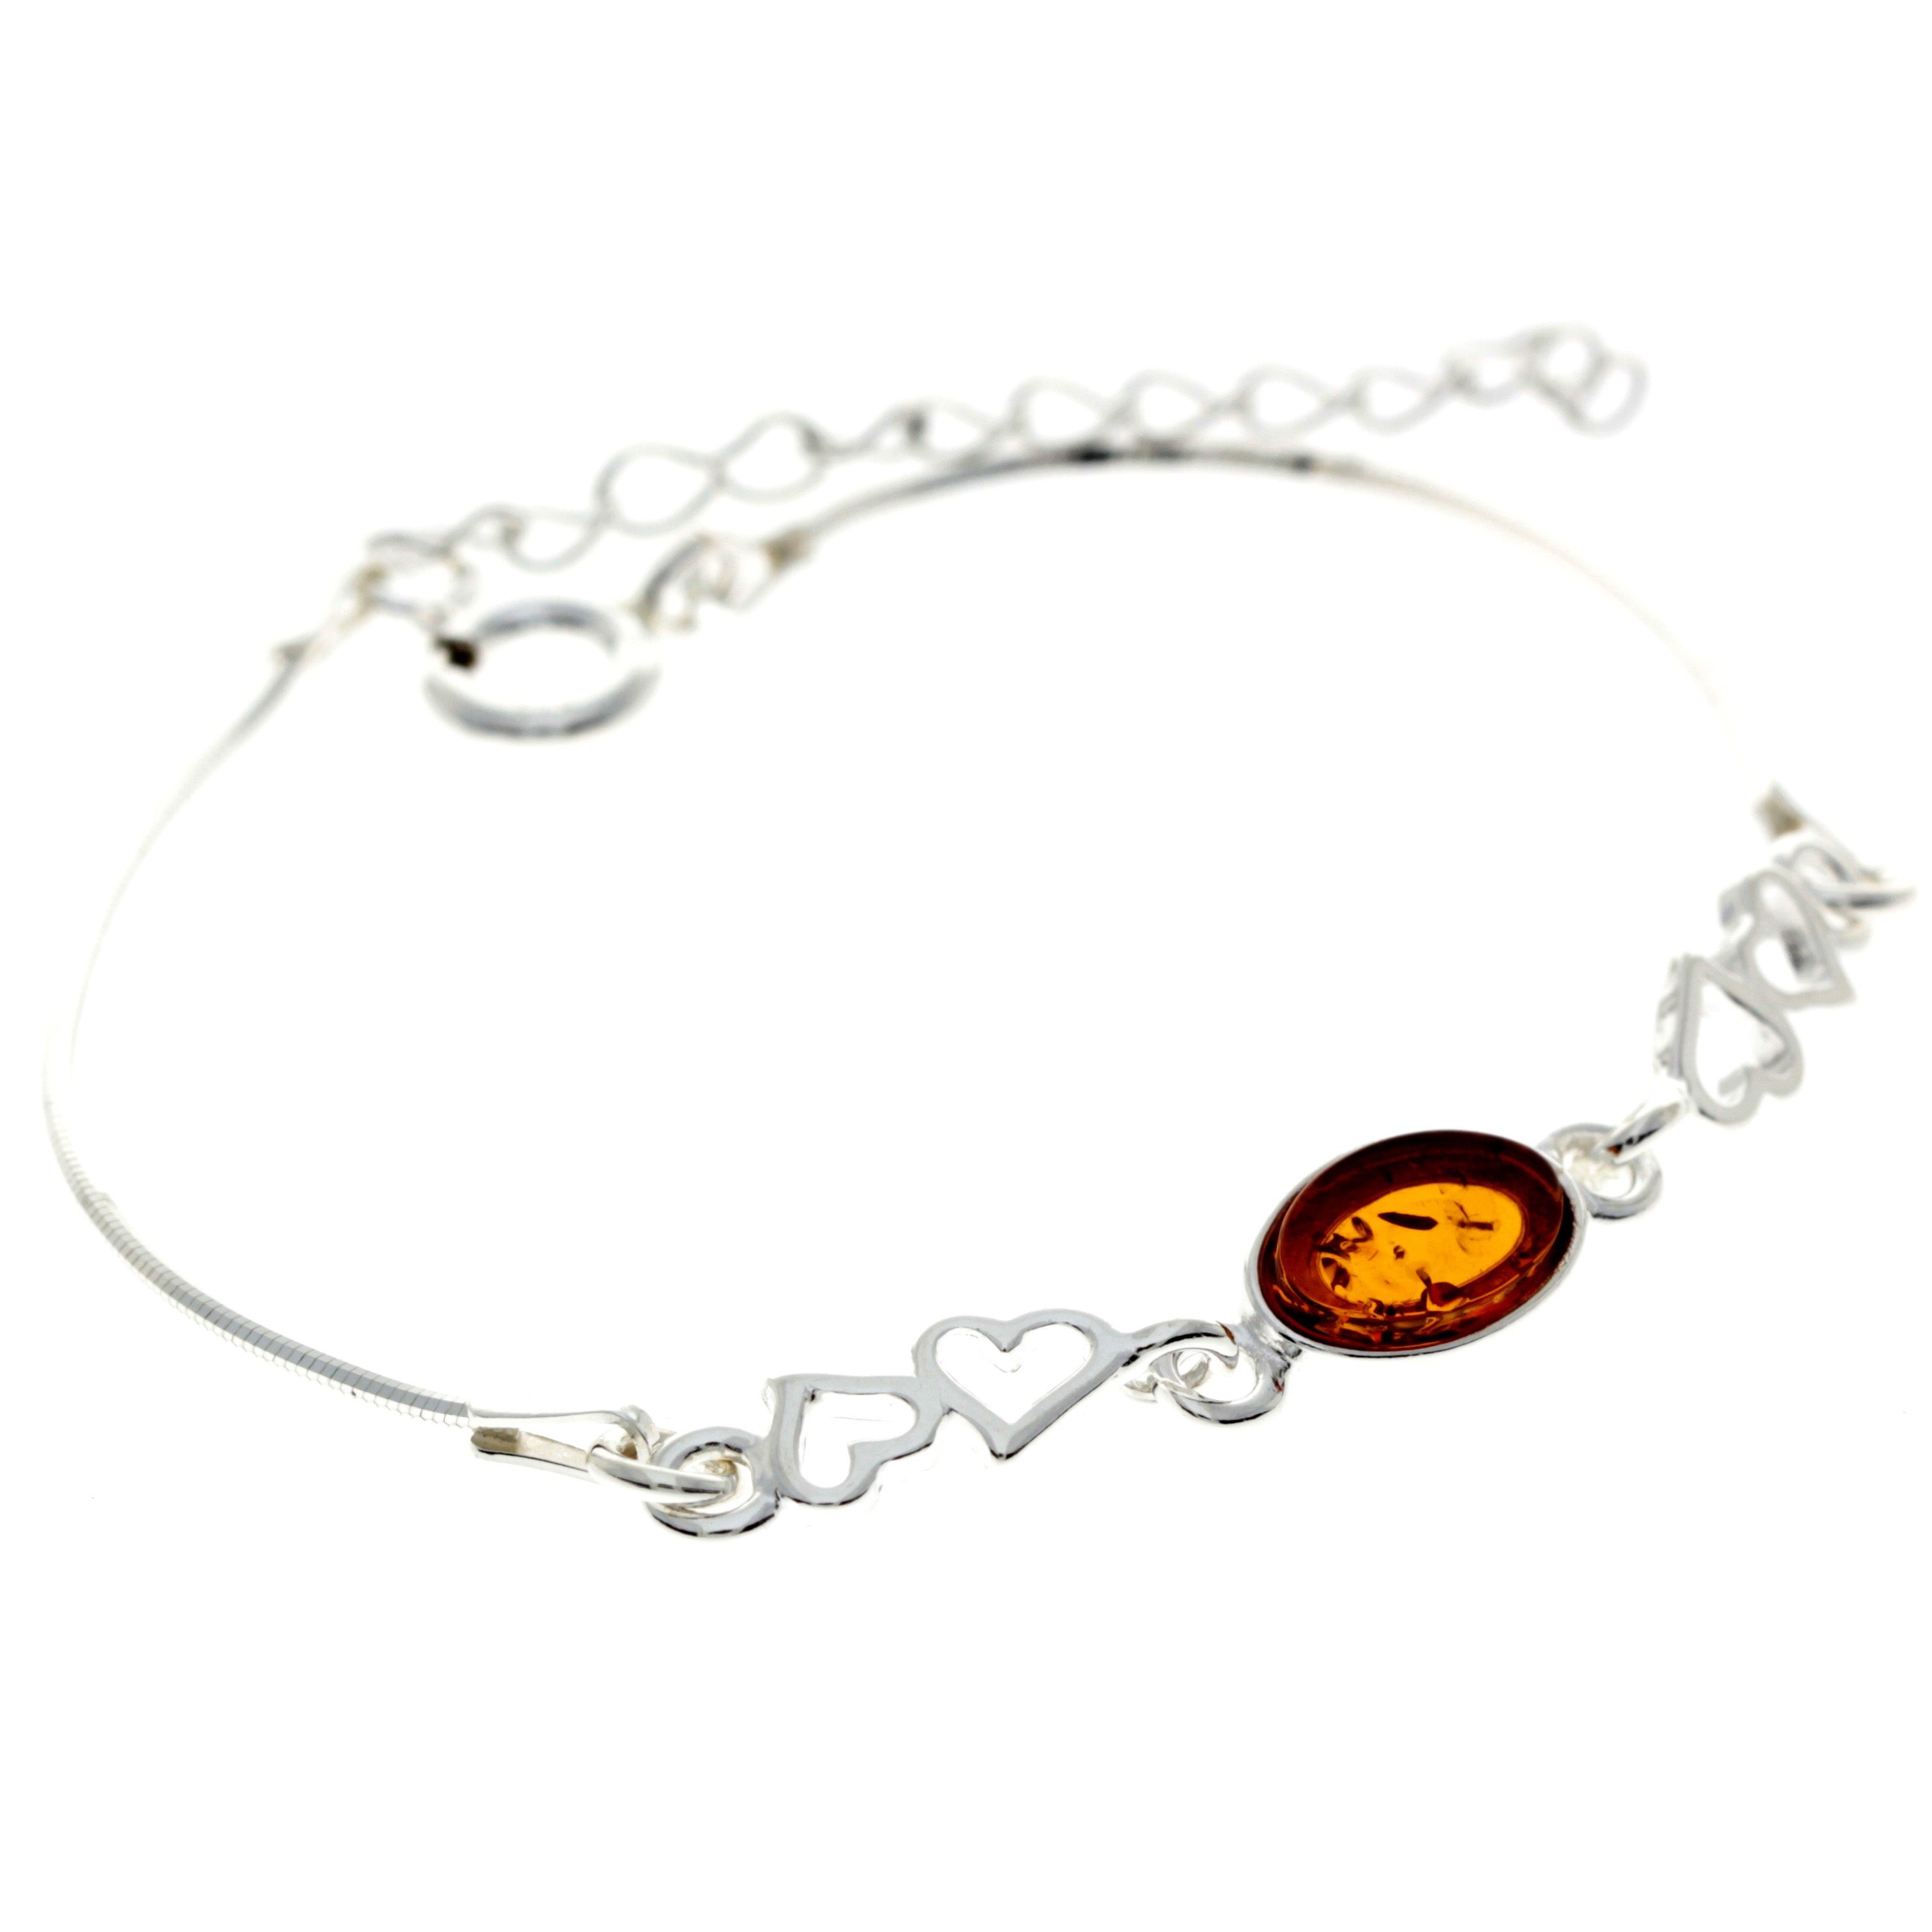 925 Sterling Silver & Baltic Amber Adjustable Bracelet with Silver Hearts - M560